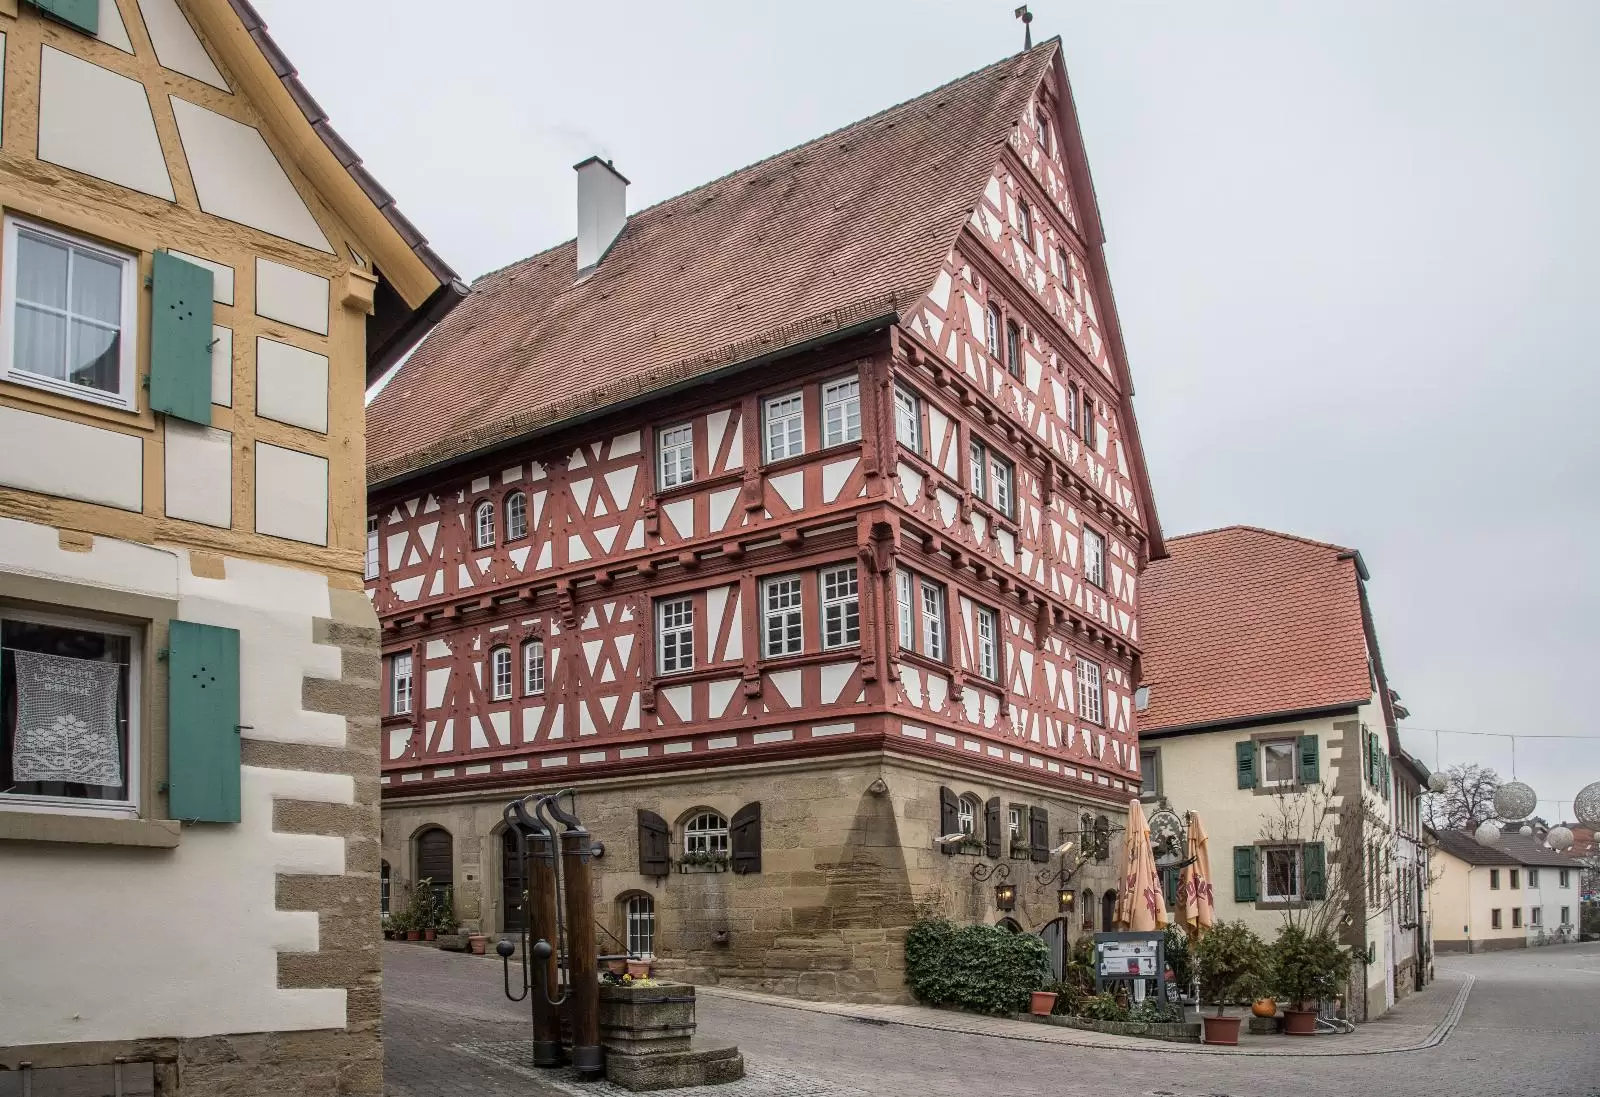 Eppingen Old Town